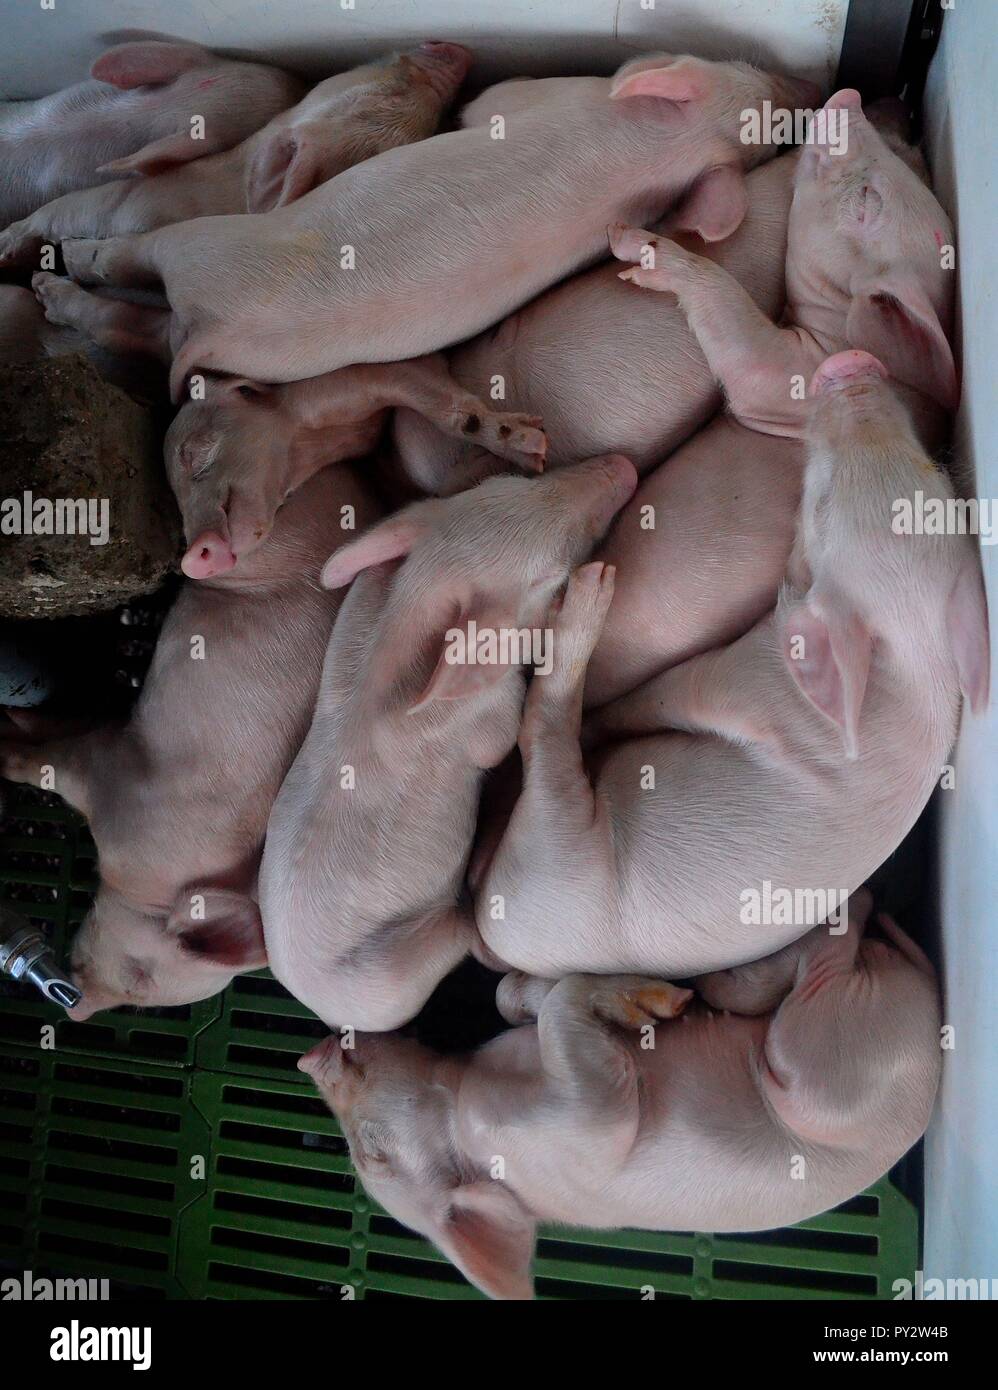 A bunch of pigs huddled together to prevent being cold and sleeping next to their mother while they await to be sold. Stock Photo